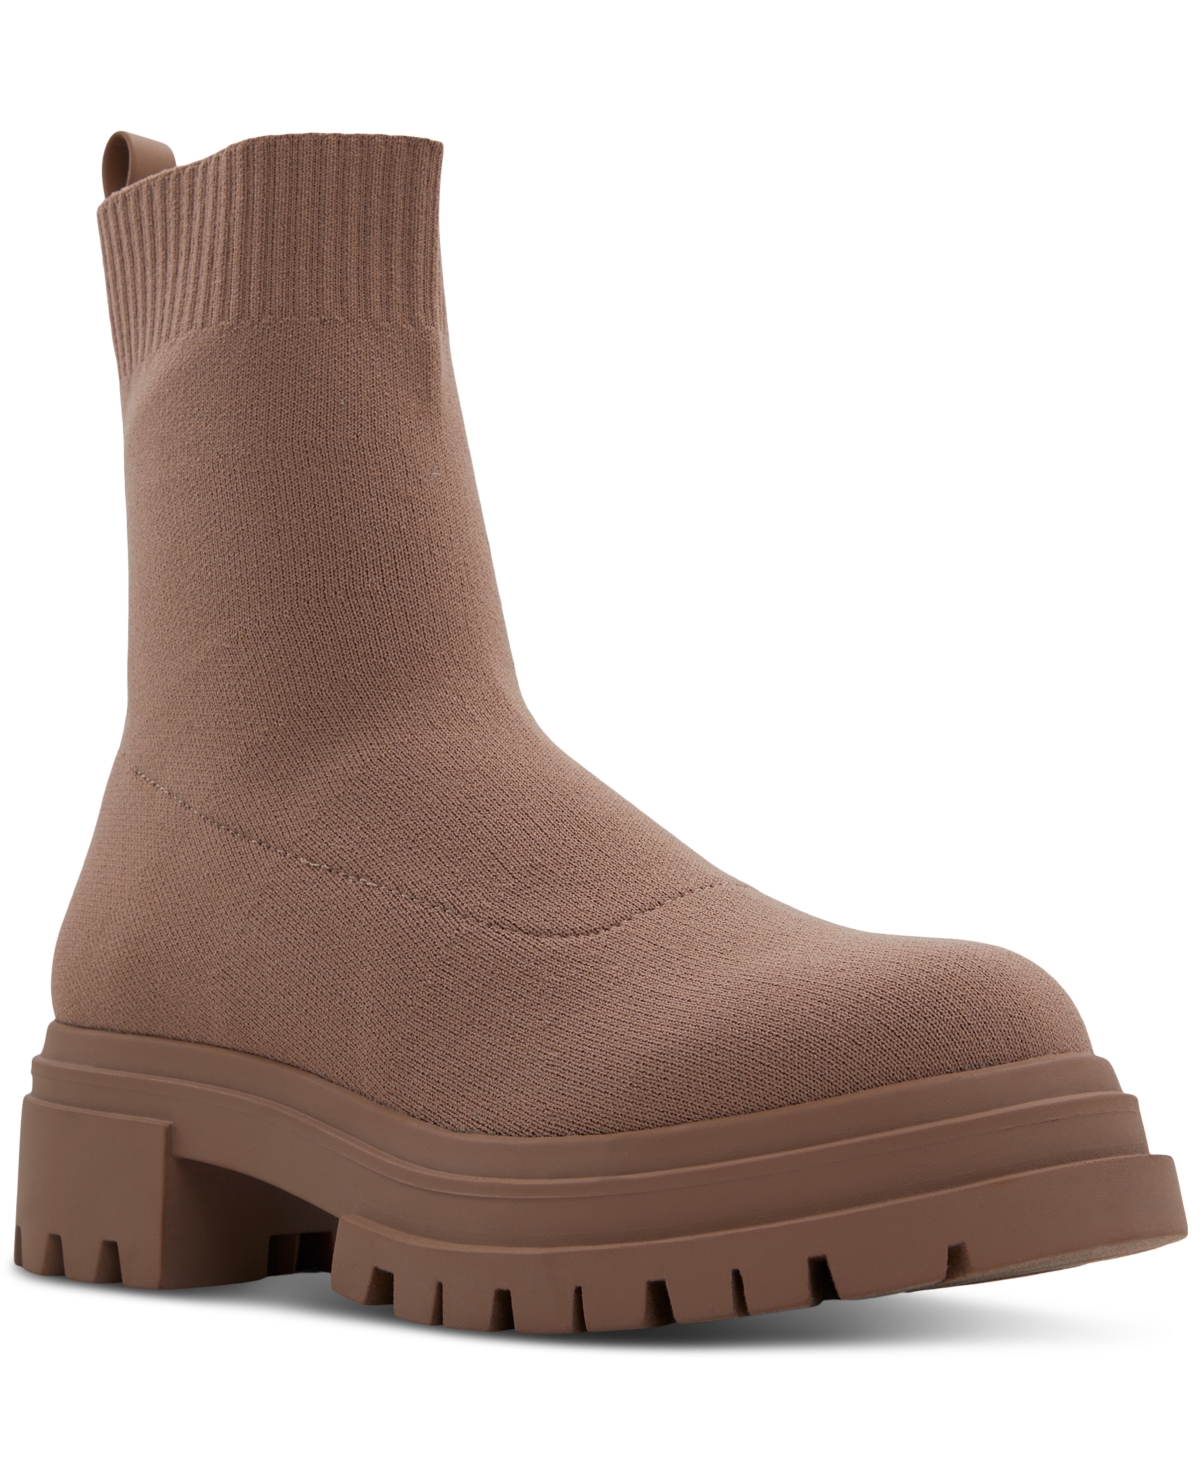 Women's North Knit Pull-On Lug Sole Boots - Light Brown